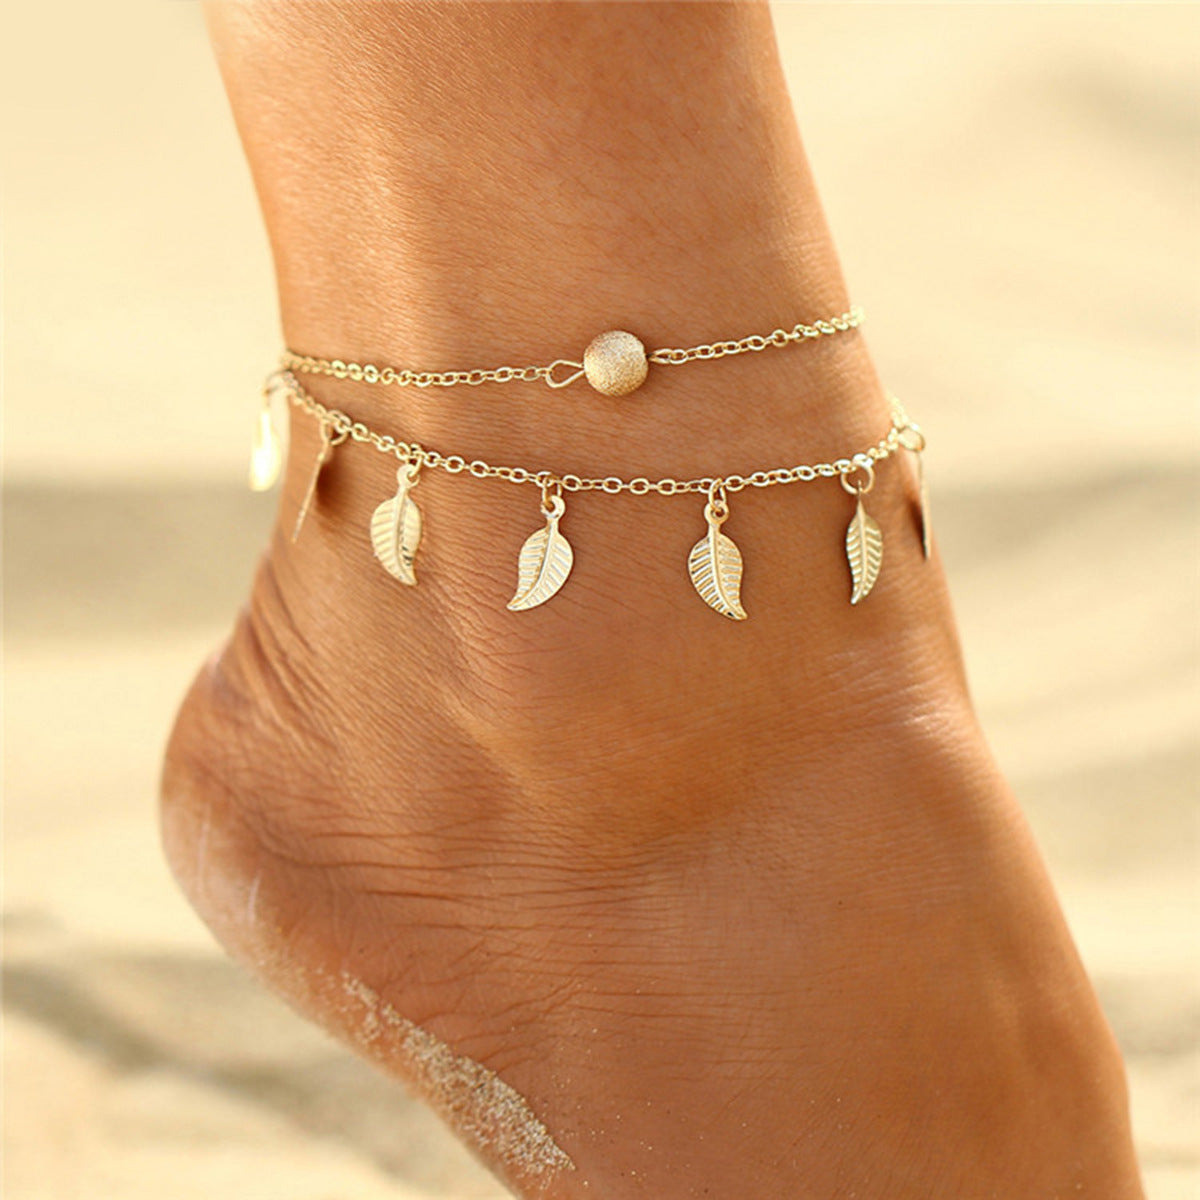 About Double Fringed Ethnic Style Anklet